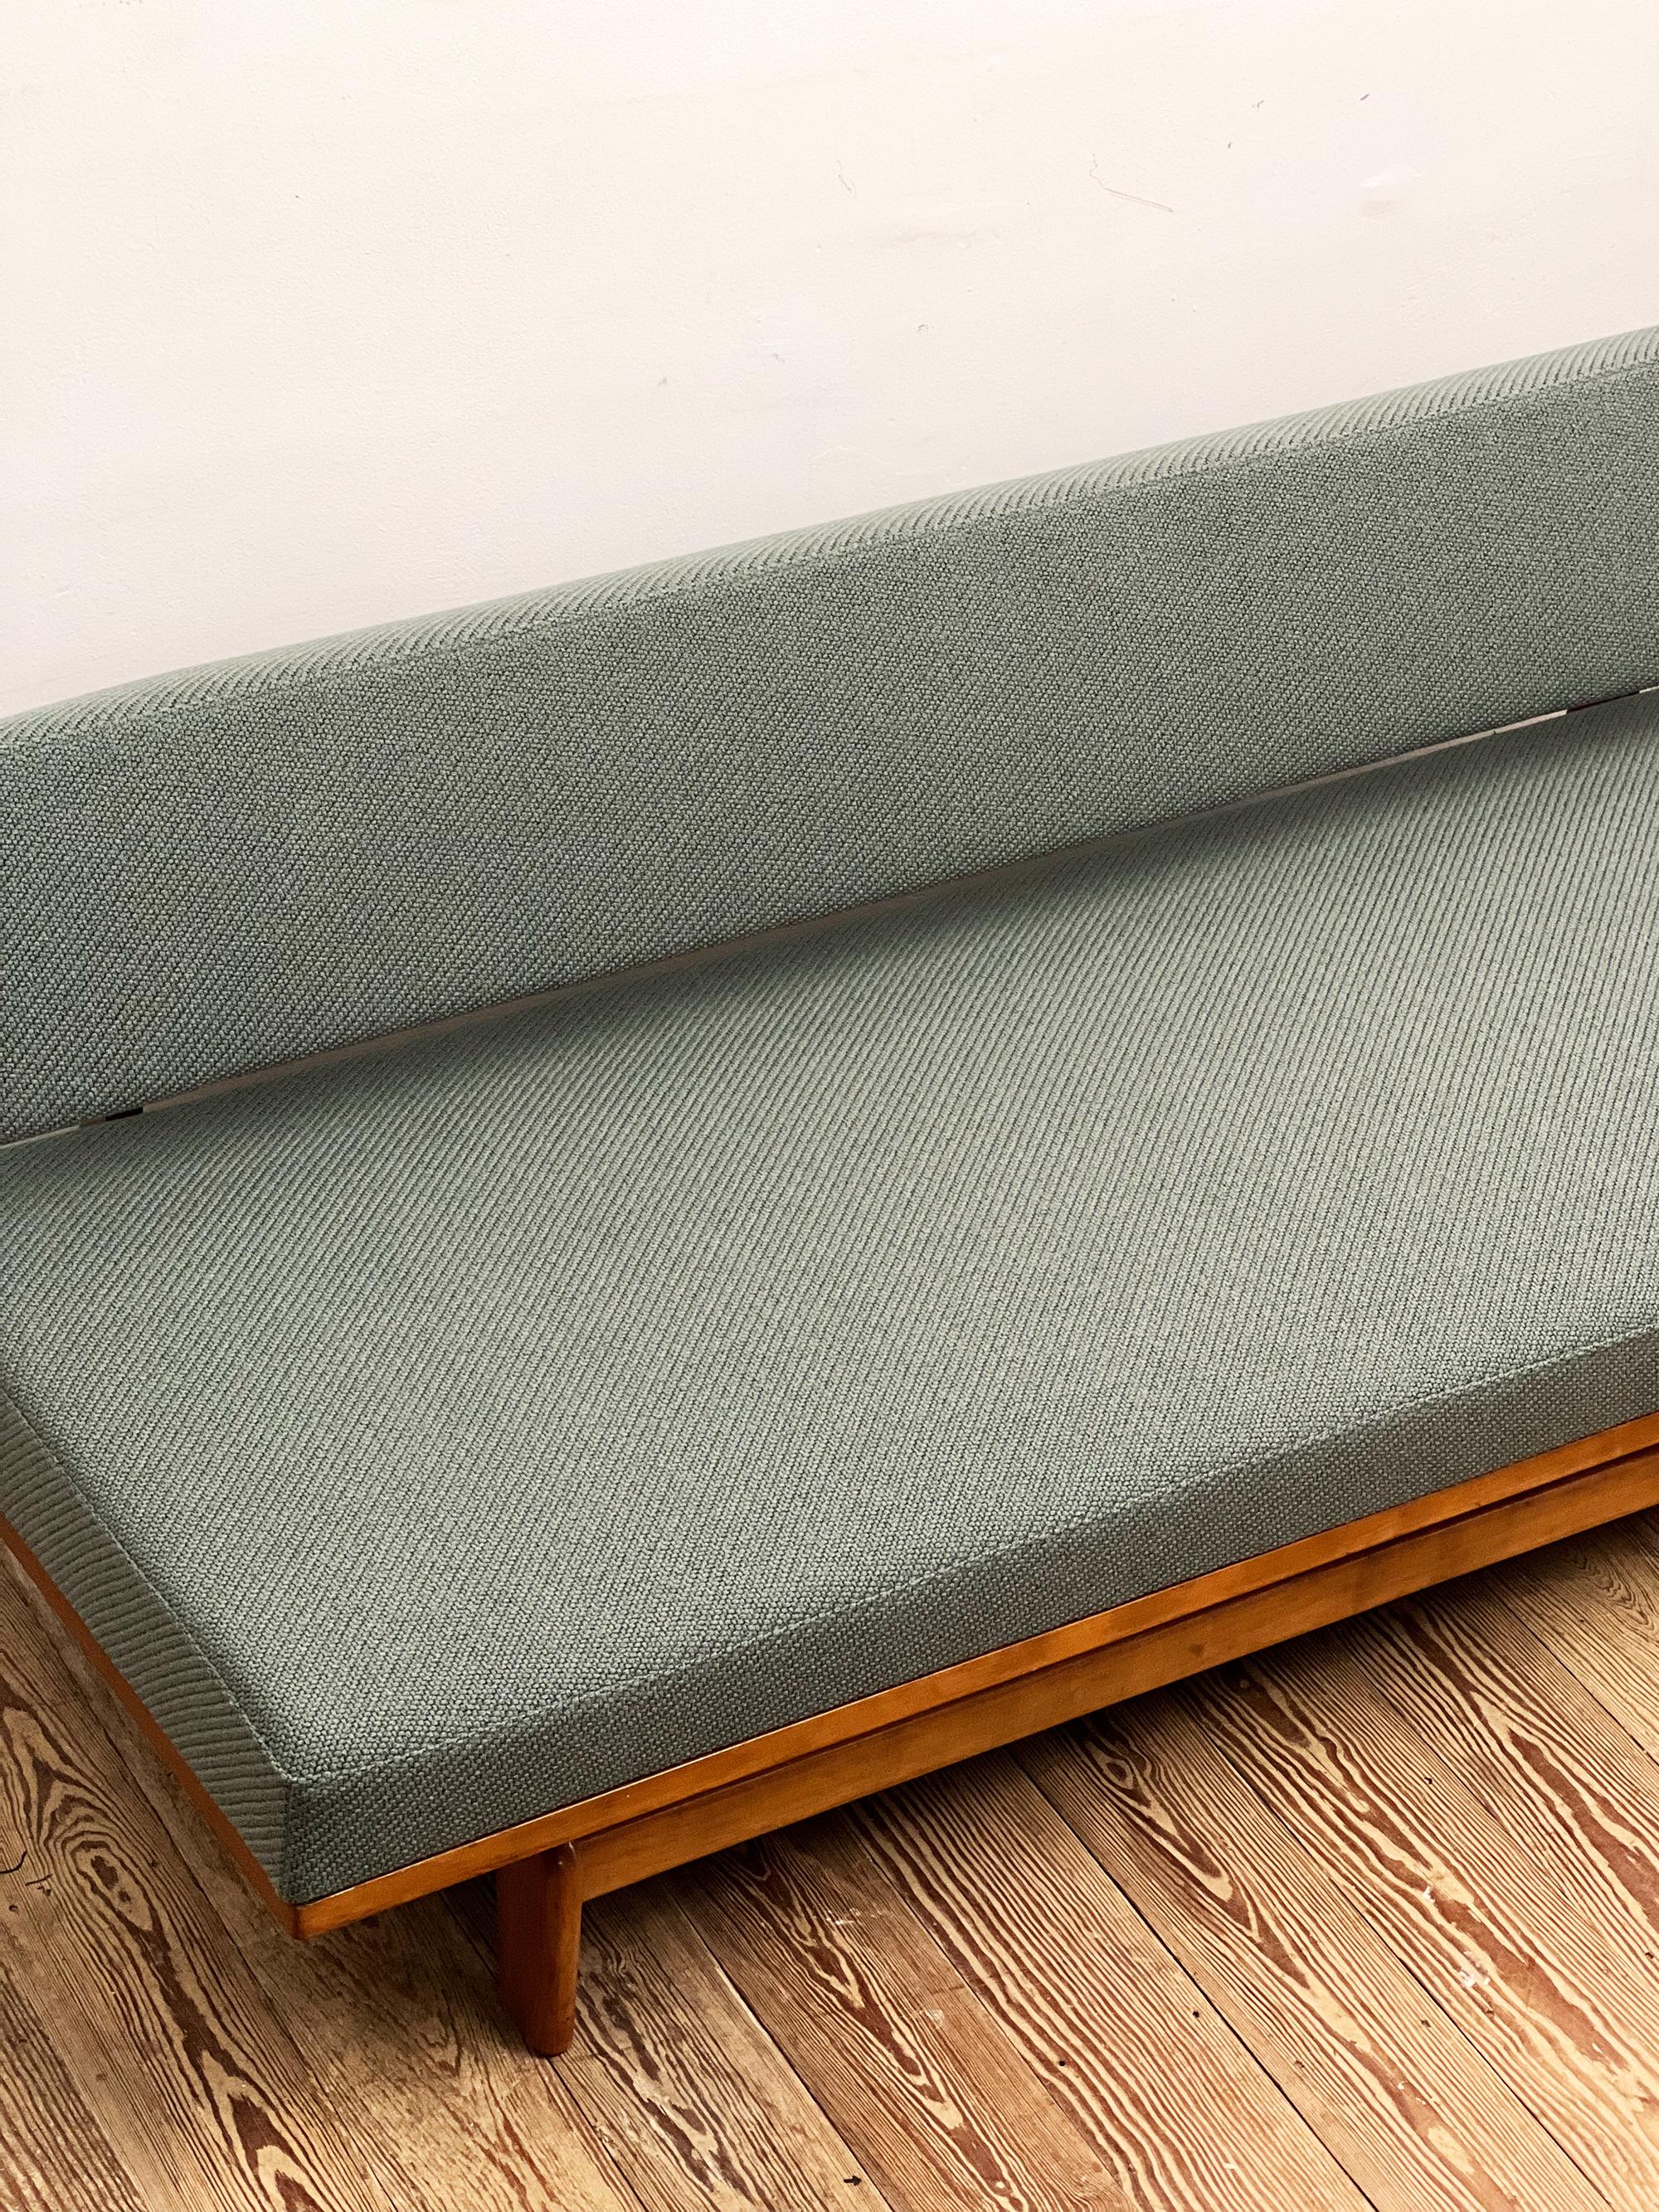 Mid-Century 3 Seat Sofa by Hans Bellmann for Wilkhahn, Germany, 1950s For Sale 10